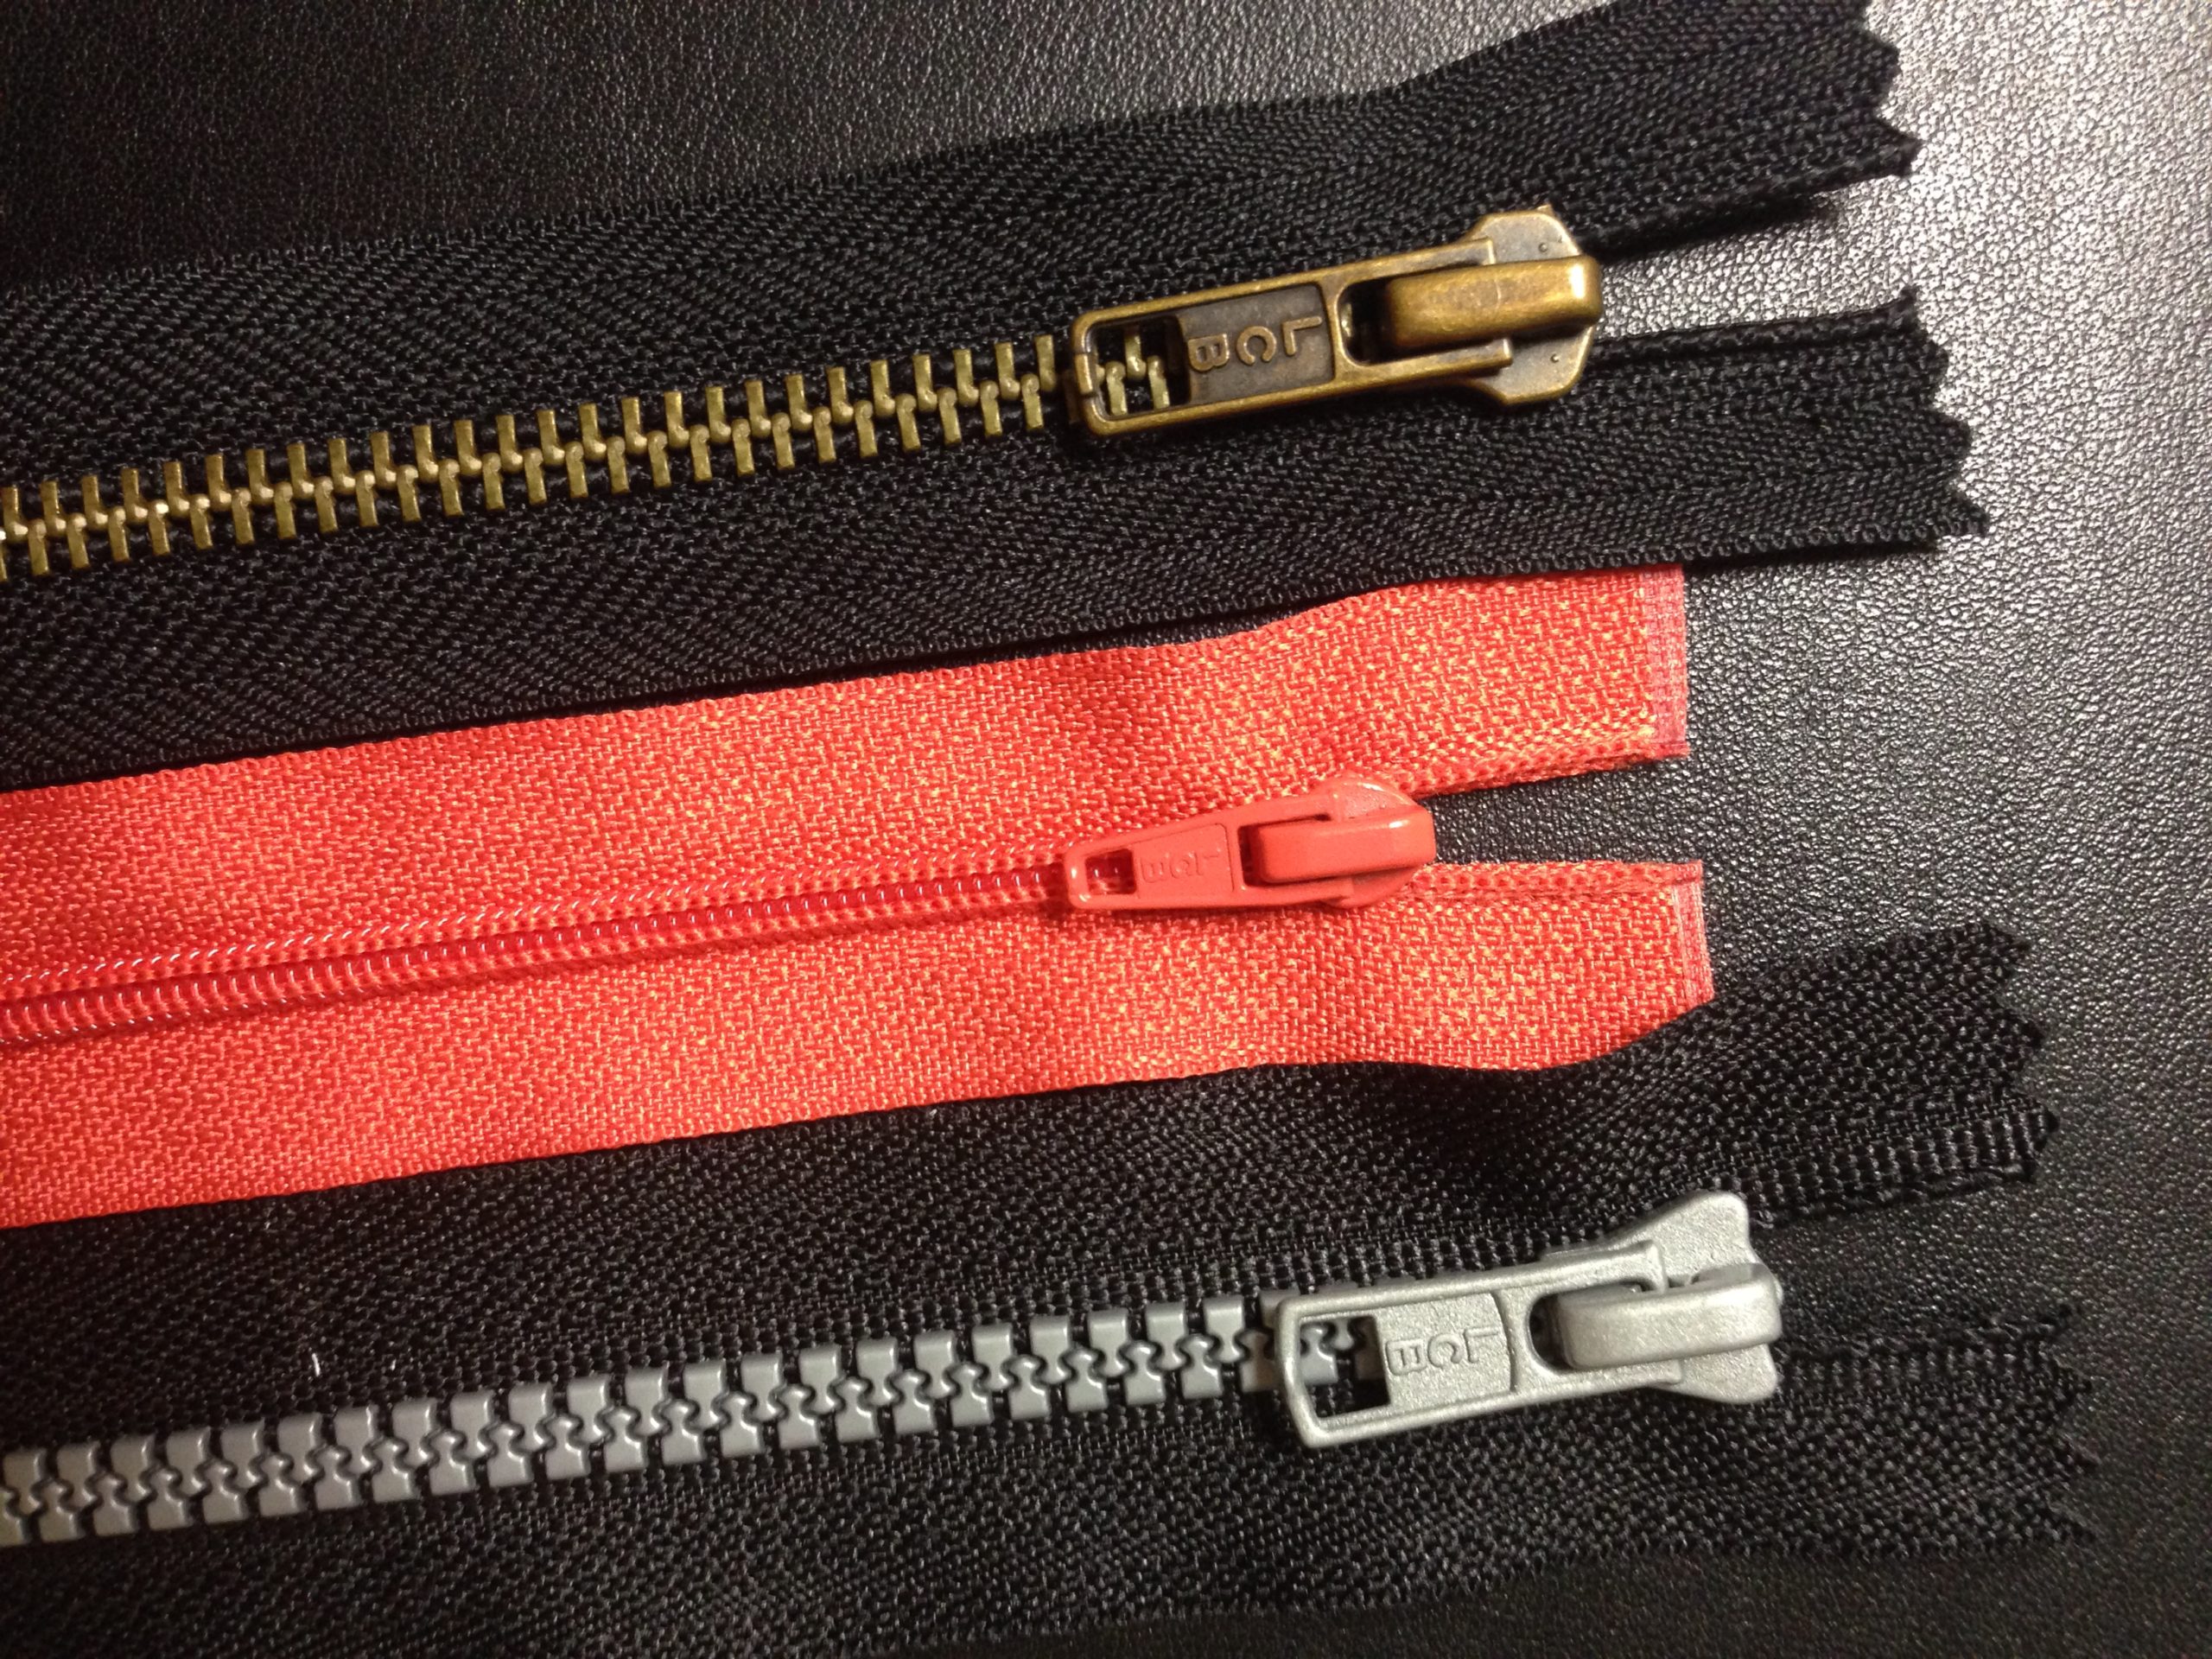 Lubricate your zippers for easy movement